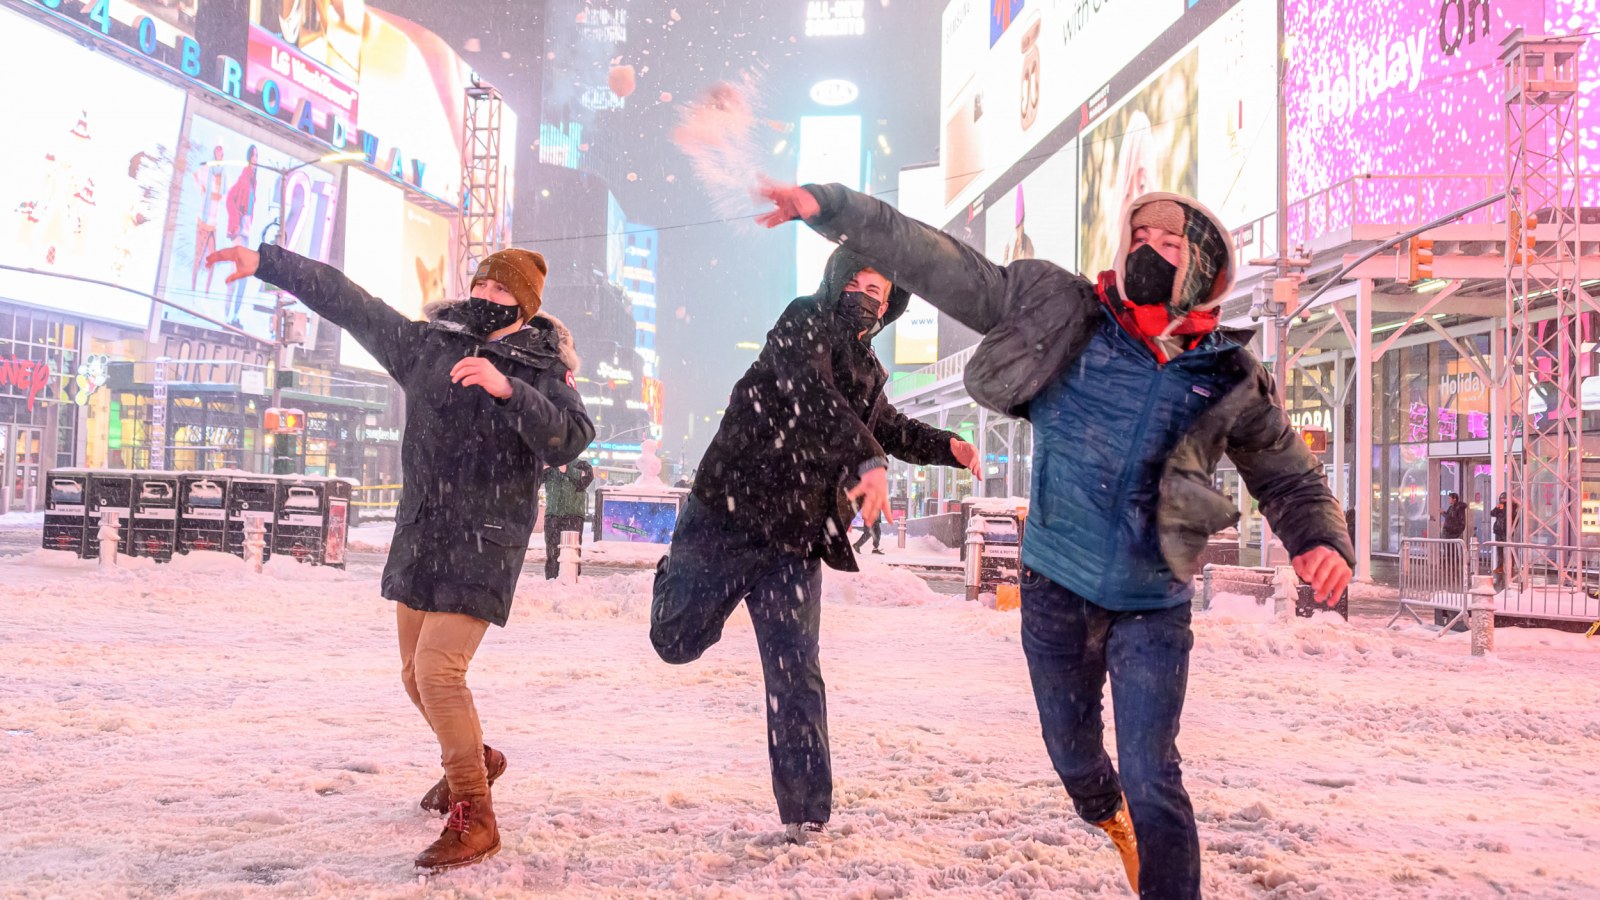 New York Winter Storm Photo and Videos Show Big Apple Blanketed in Snow